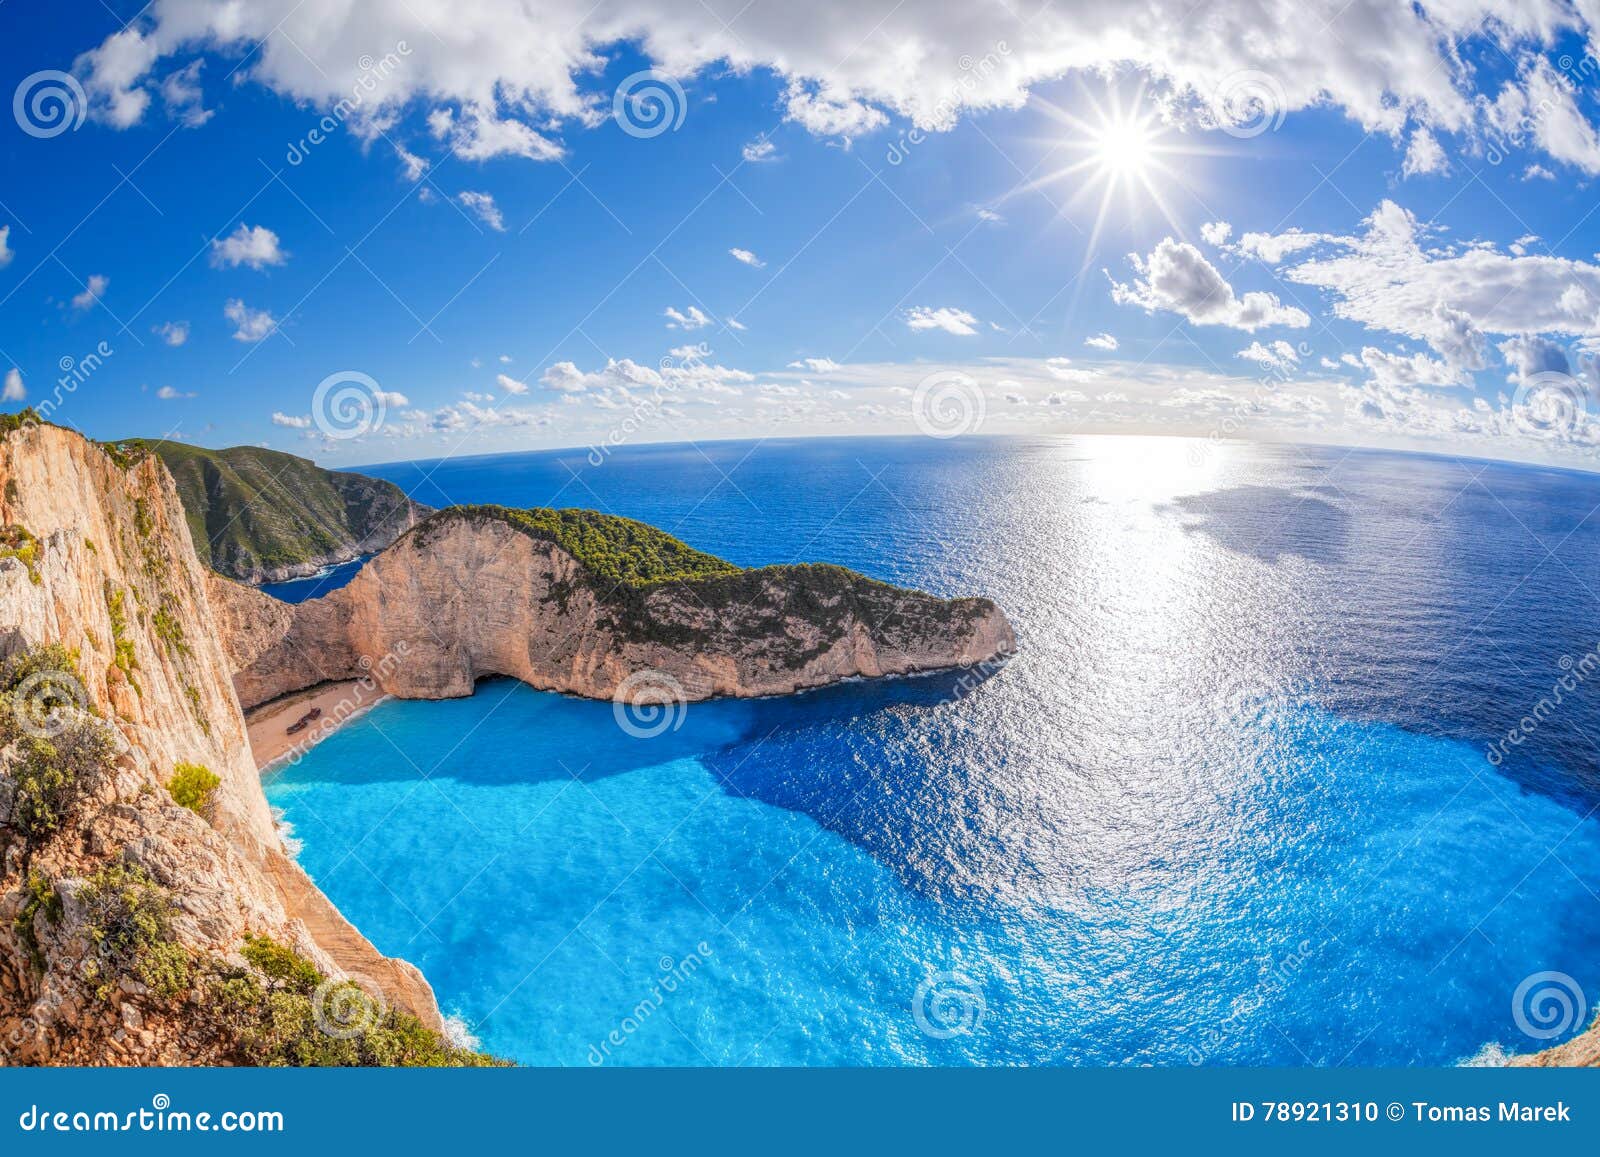 navagio beach with shipwreck against sunset on zakynthos island in greece